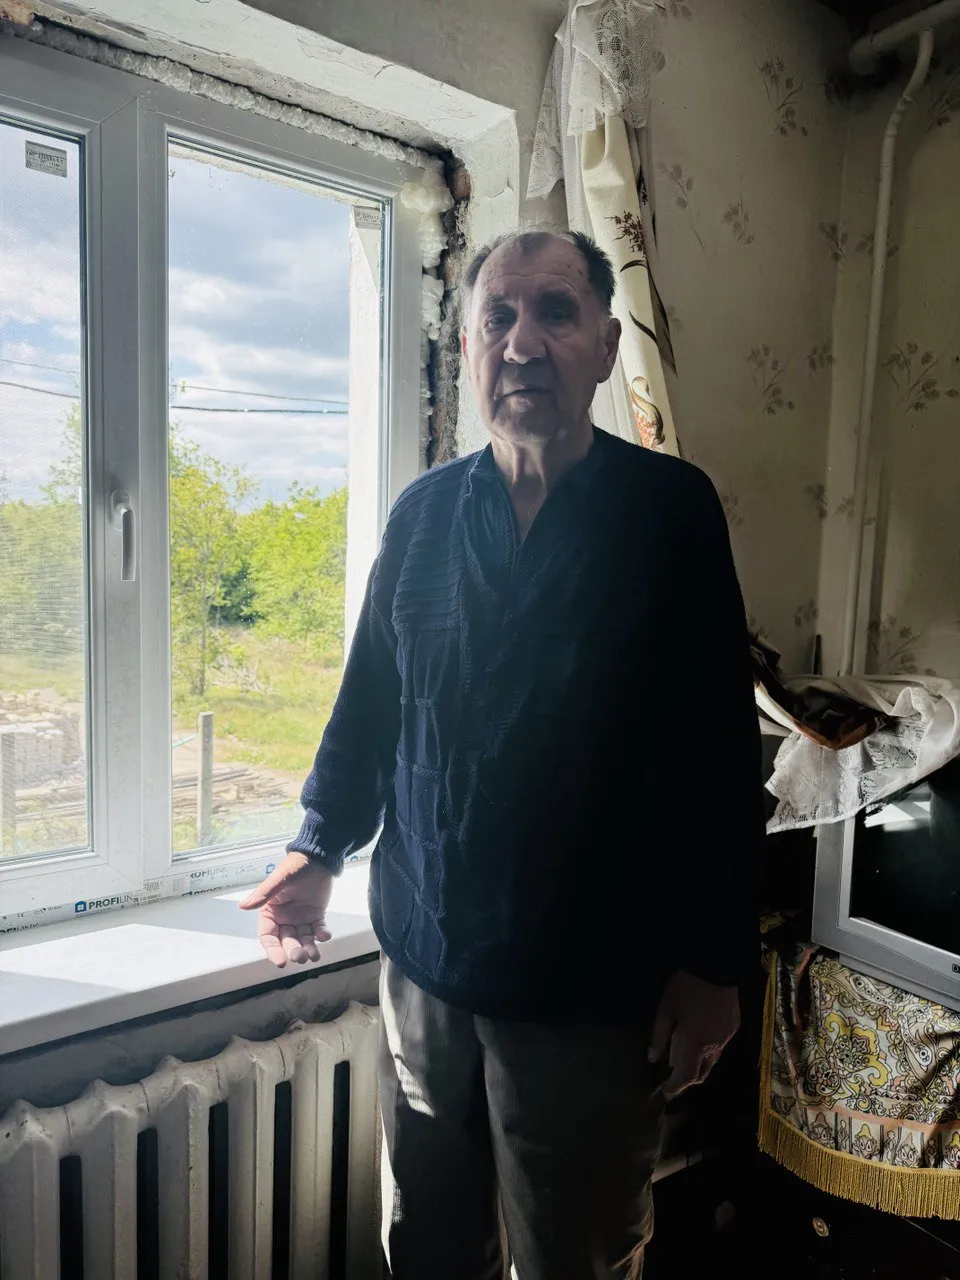 Image of an older man standing indoors, next to a window.